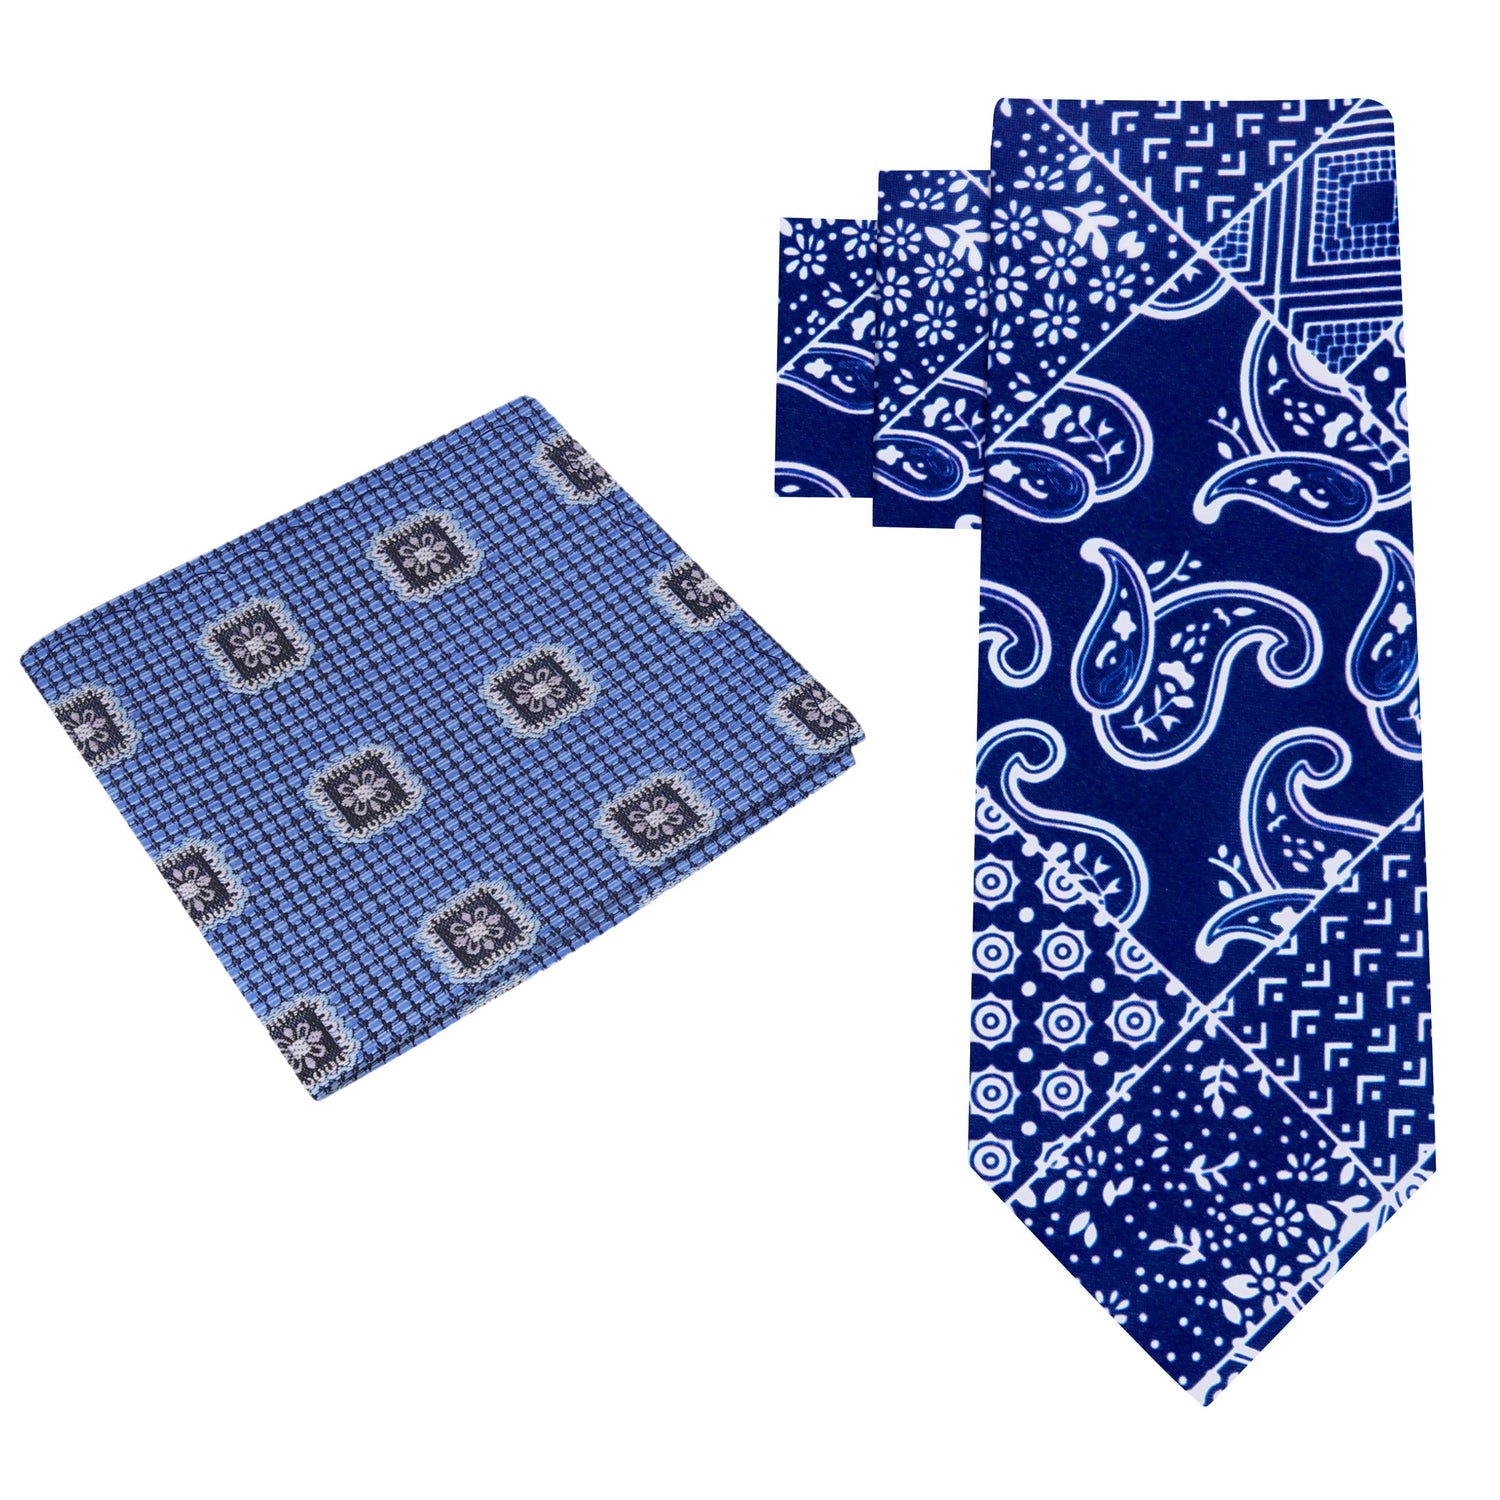 Alt View: Blue and White Paisley Tie with Blue Geometric Square